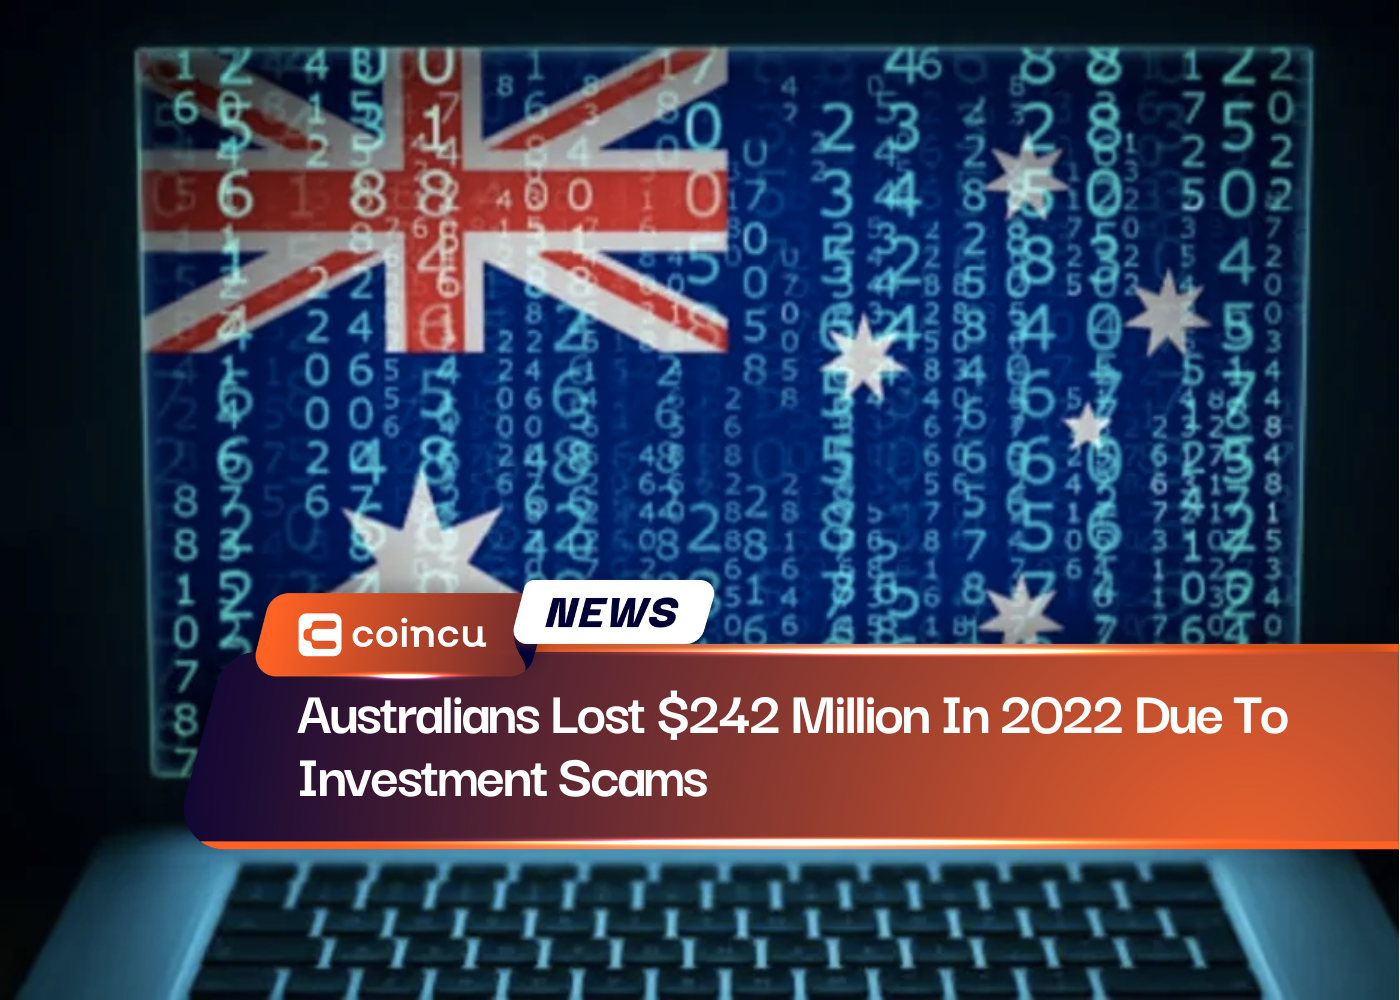 Australians Lost $242 Million In 2022 Due To Investment Scams